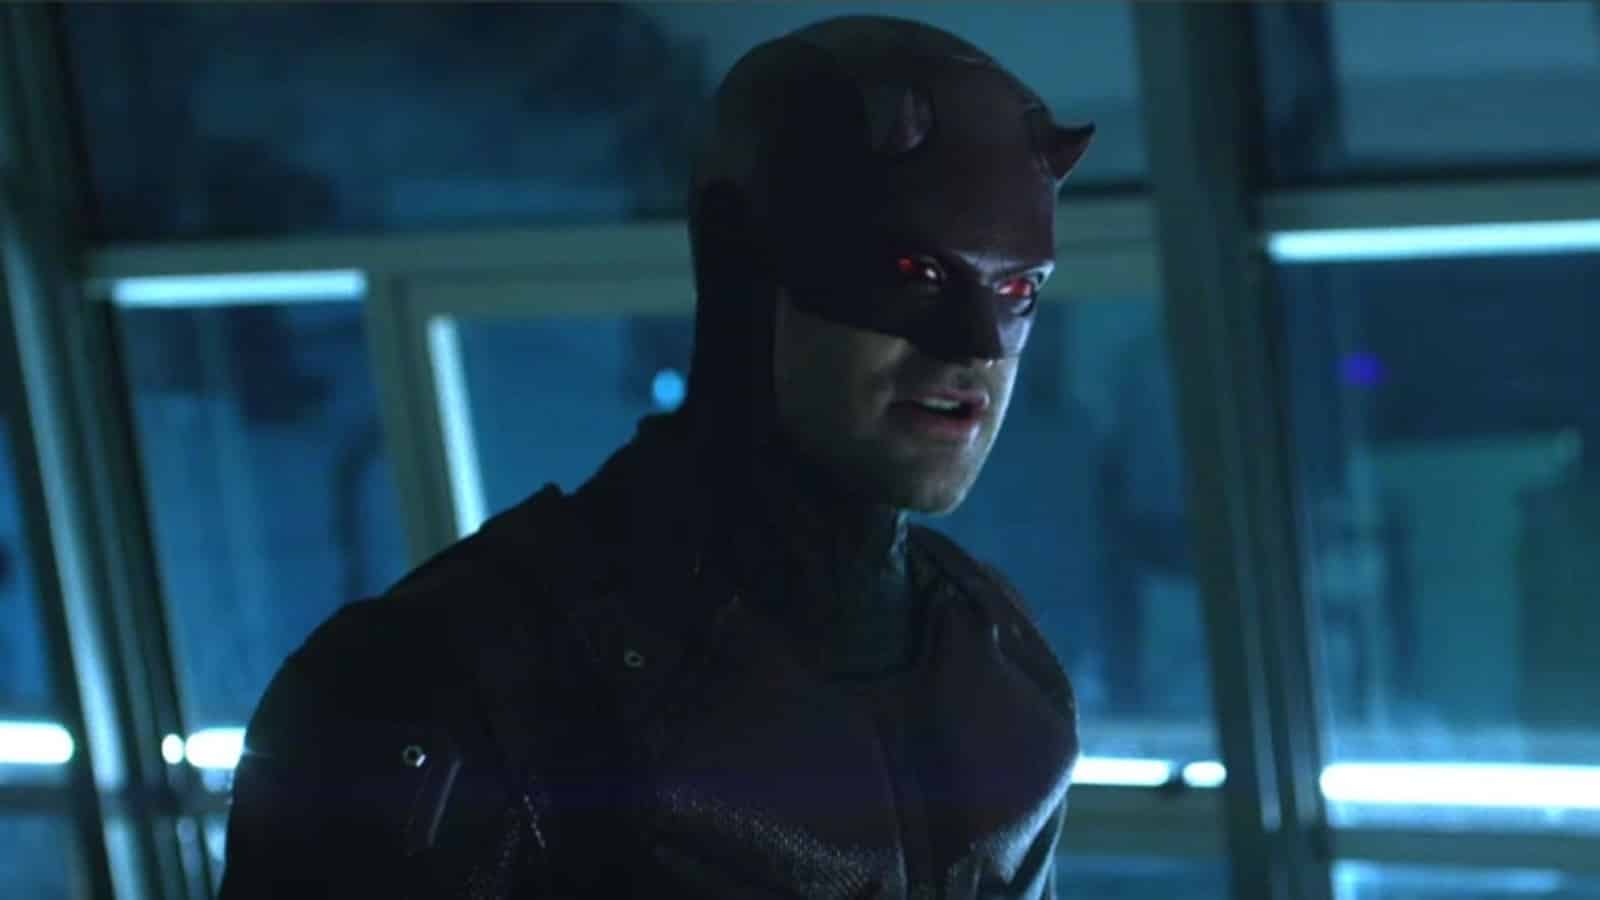 An image of Charlie Cox's Daredevil on Netflix, who's returning for the Daredevil Disney Plus show.